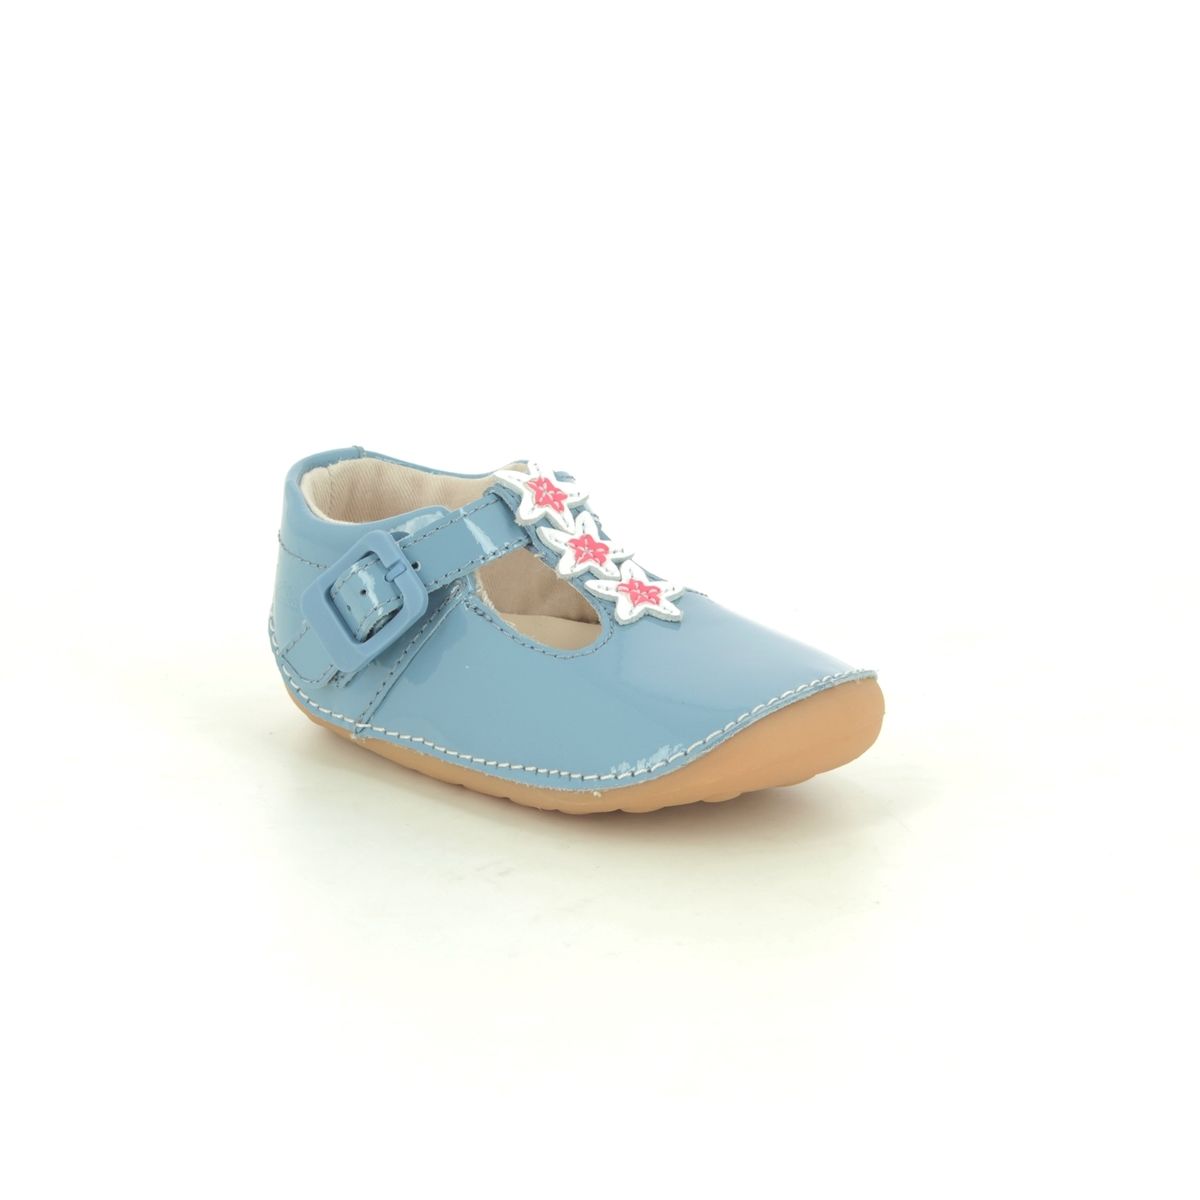 Clarks Tiny Flower T Blue Kids girls first and baby shoes 5763-77G in a Plain Leather in Size 3.5